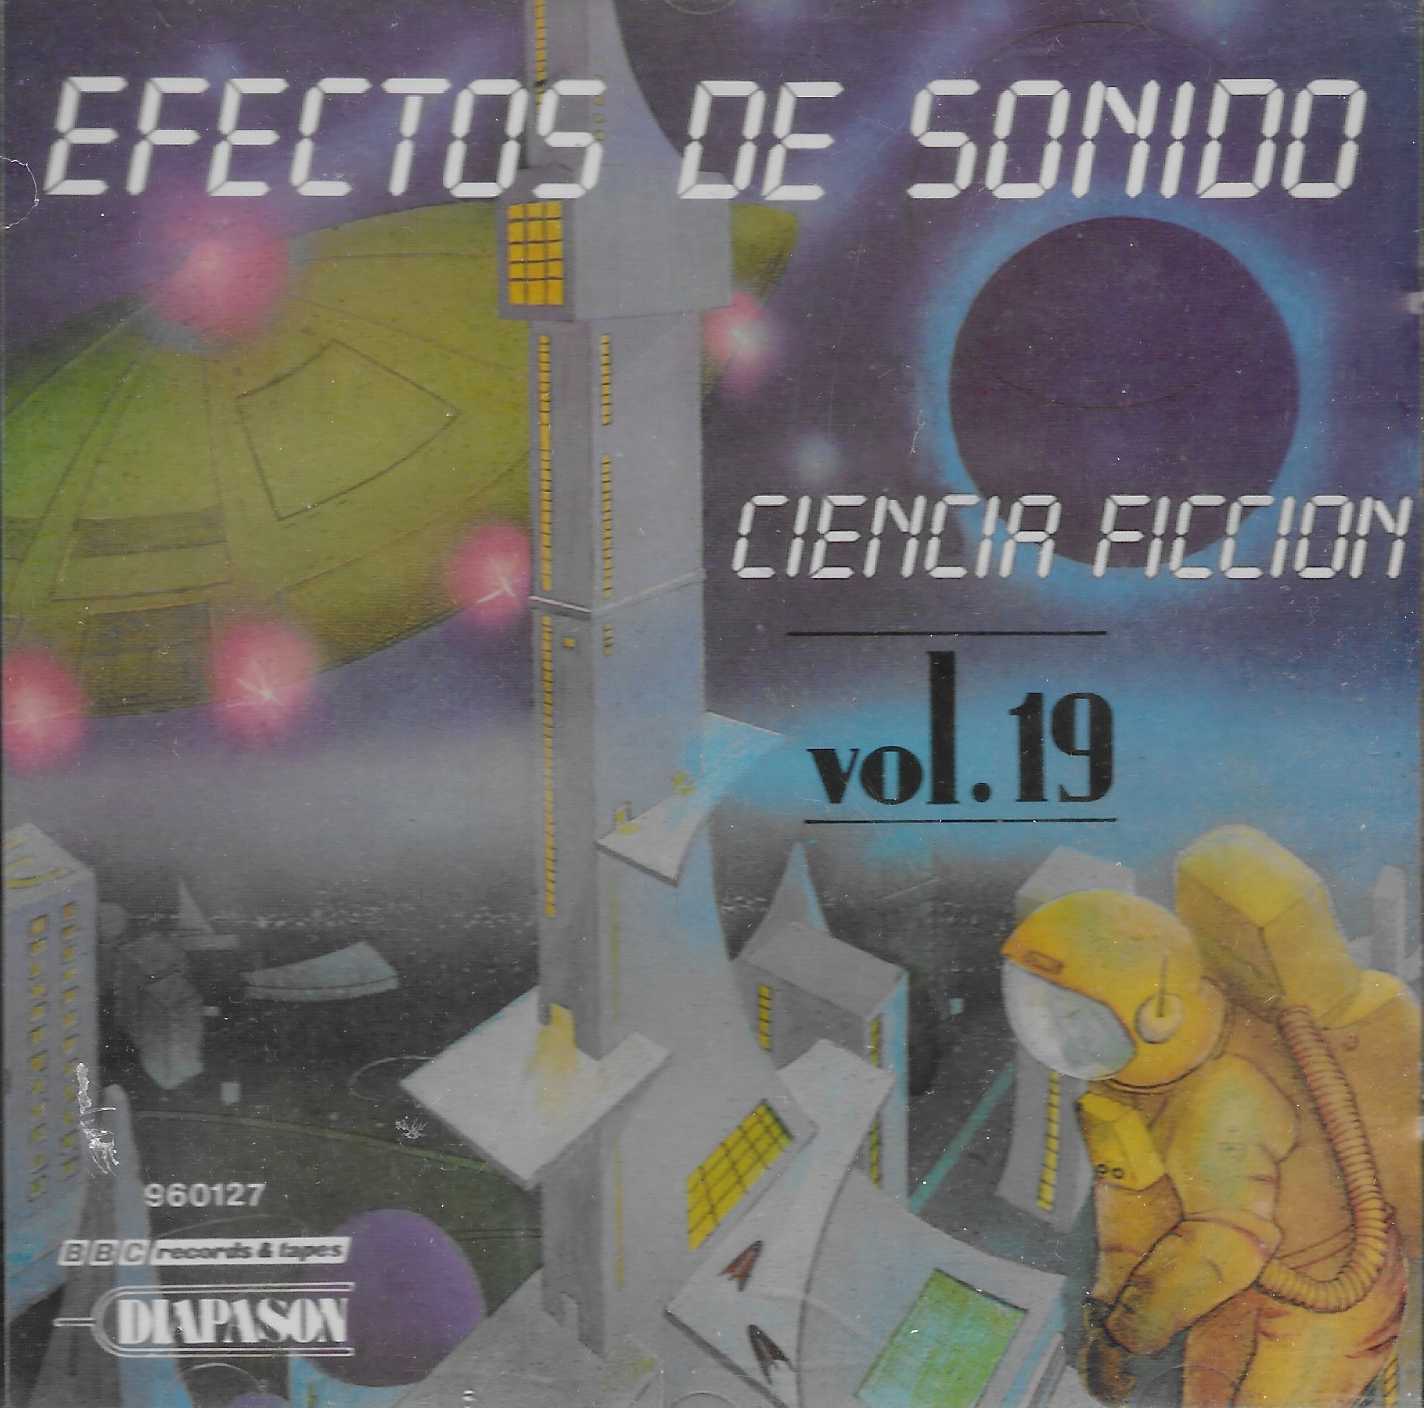 Picture of 95 0031 Effectos de sonido - Volume 19 (Spanish import) by artist Various from the BBC cds - Records and Tapes library